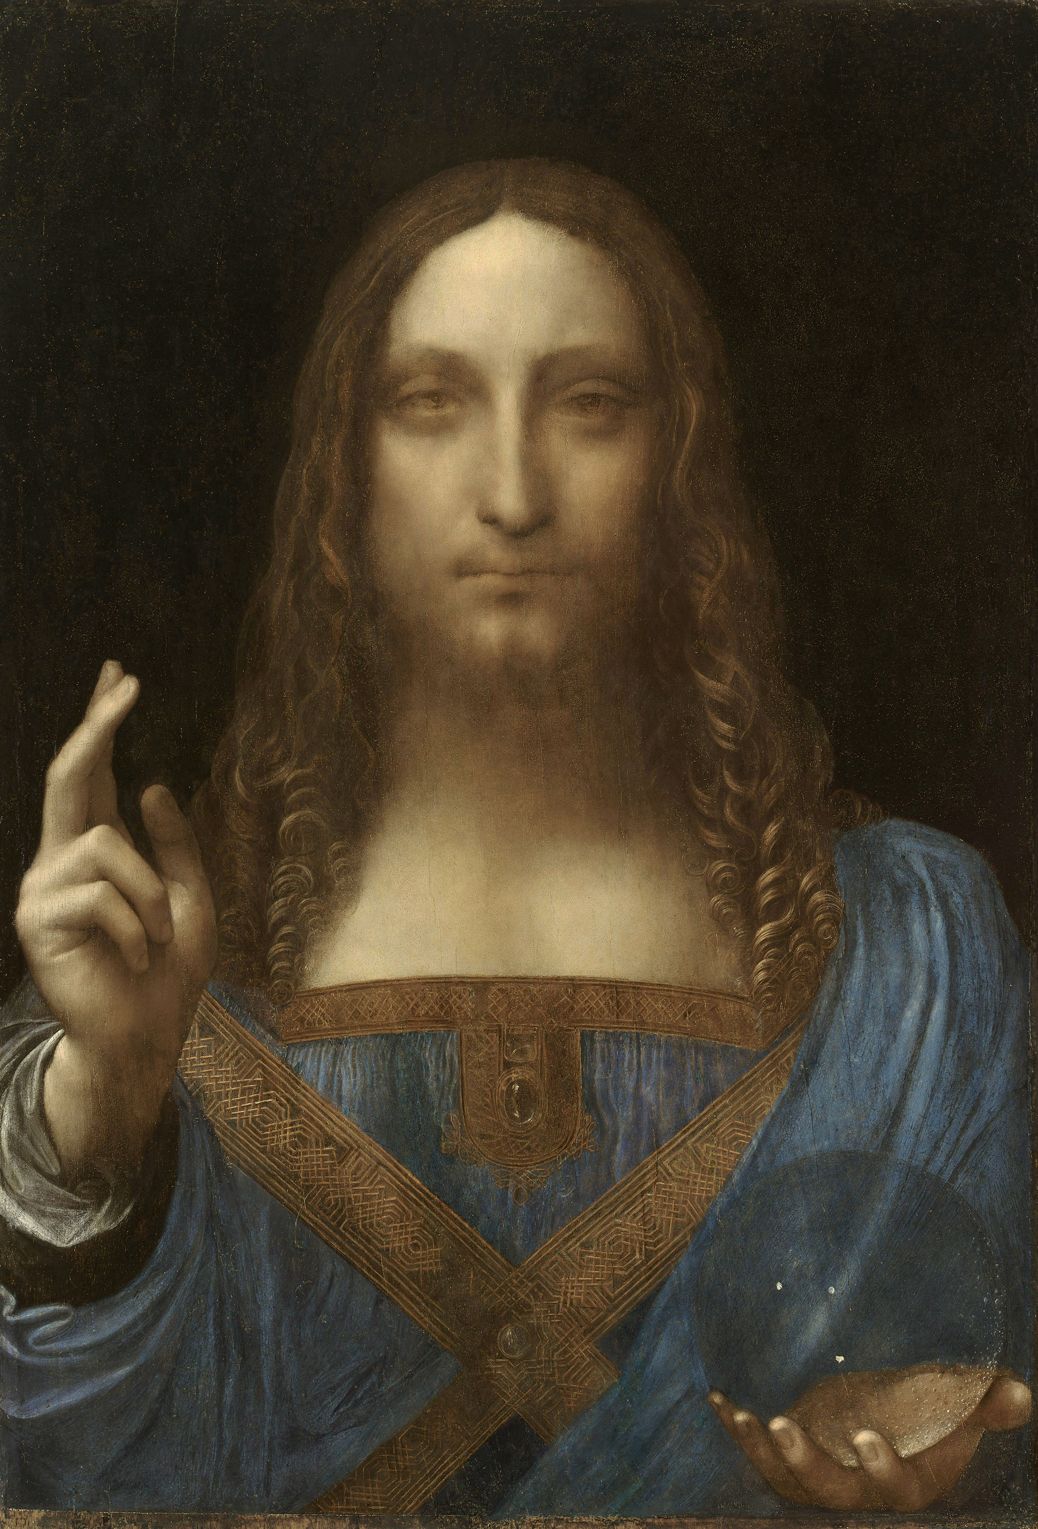 Reproduction of the painting after restoration by Dianne Dwyer Modestini, a research professor at New York University. By Leonardo da Vinci - Getty Images. Image Public Domain via Wikimedia Commons.